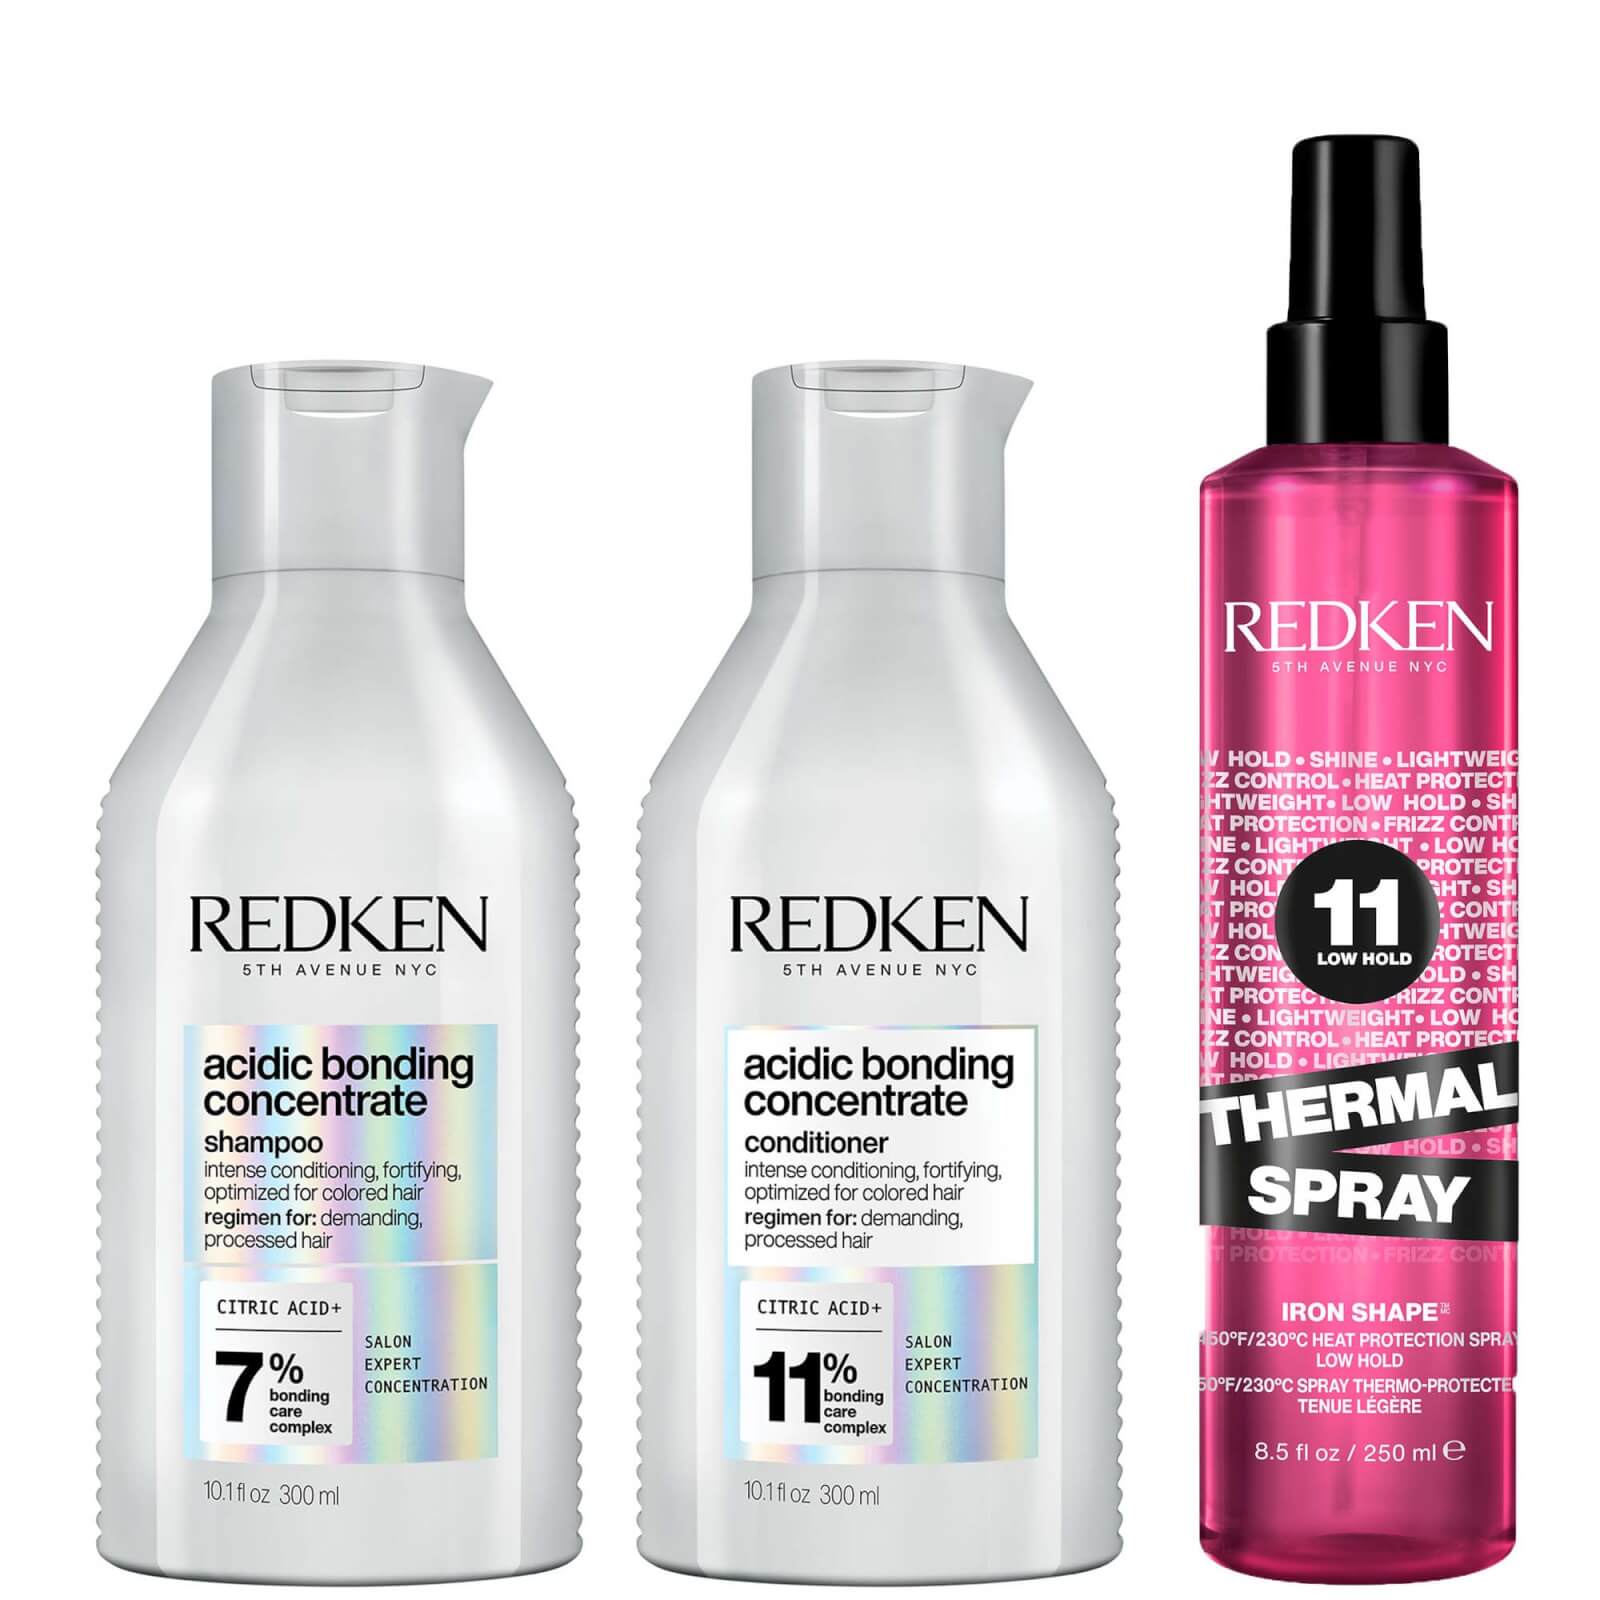 Image of Redken Acidic Bonding Concentrate Shampoo and Conditioner with Thermal Heat Protector